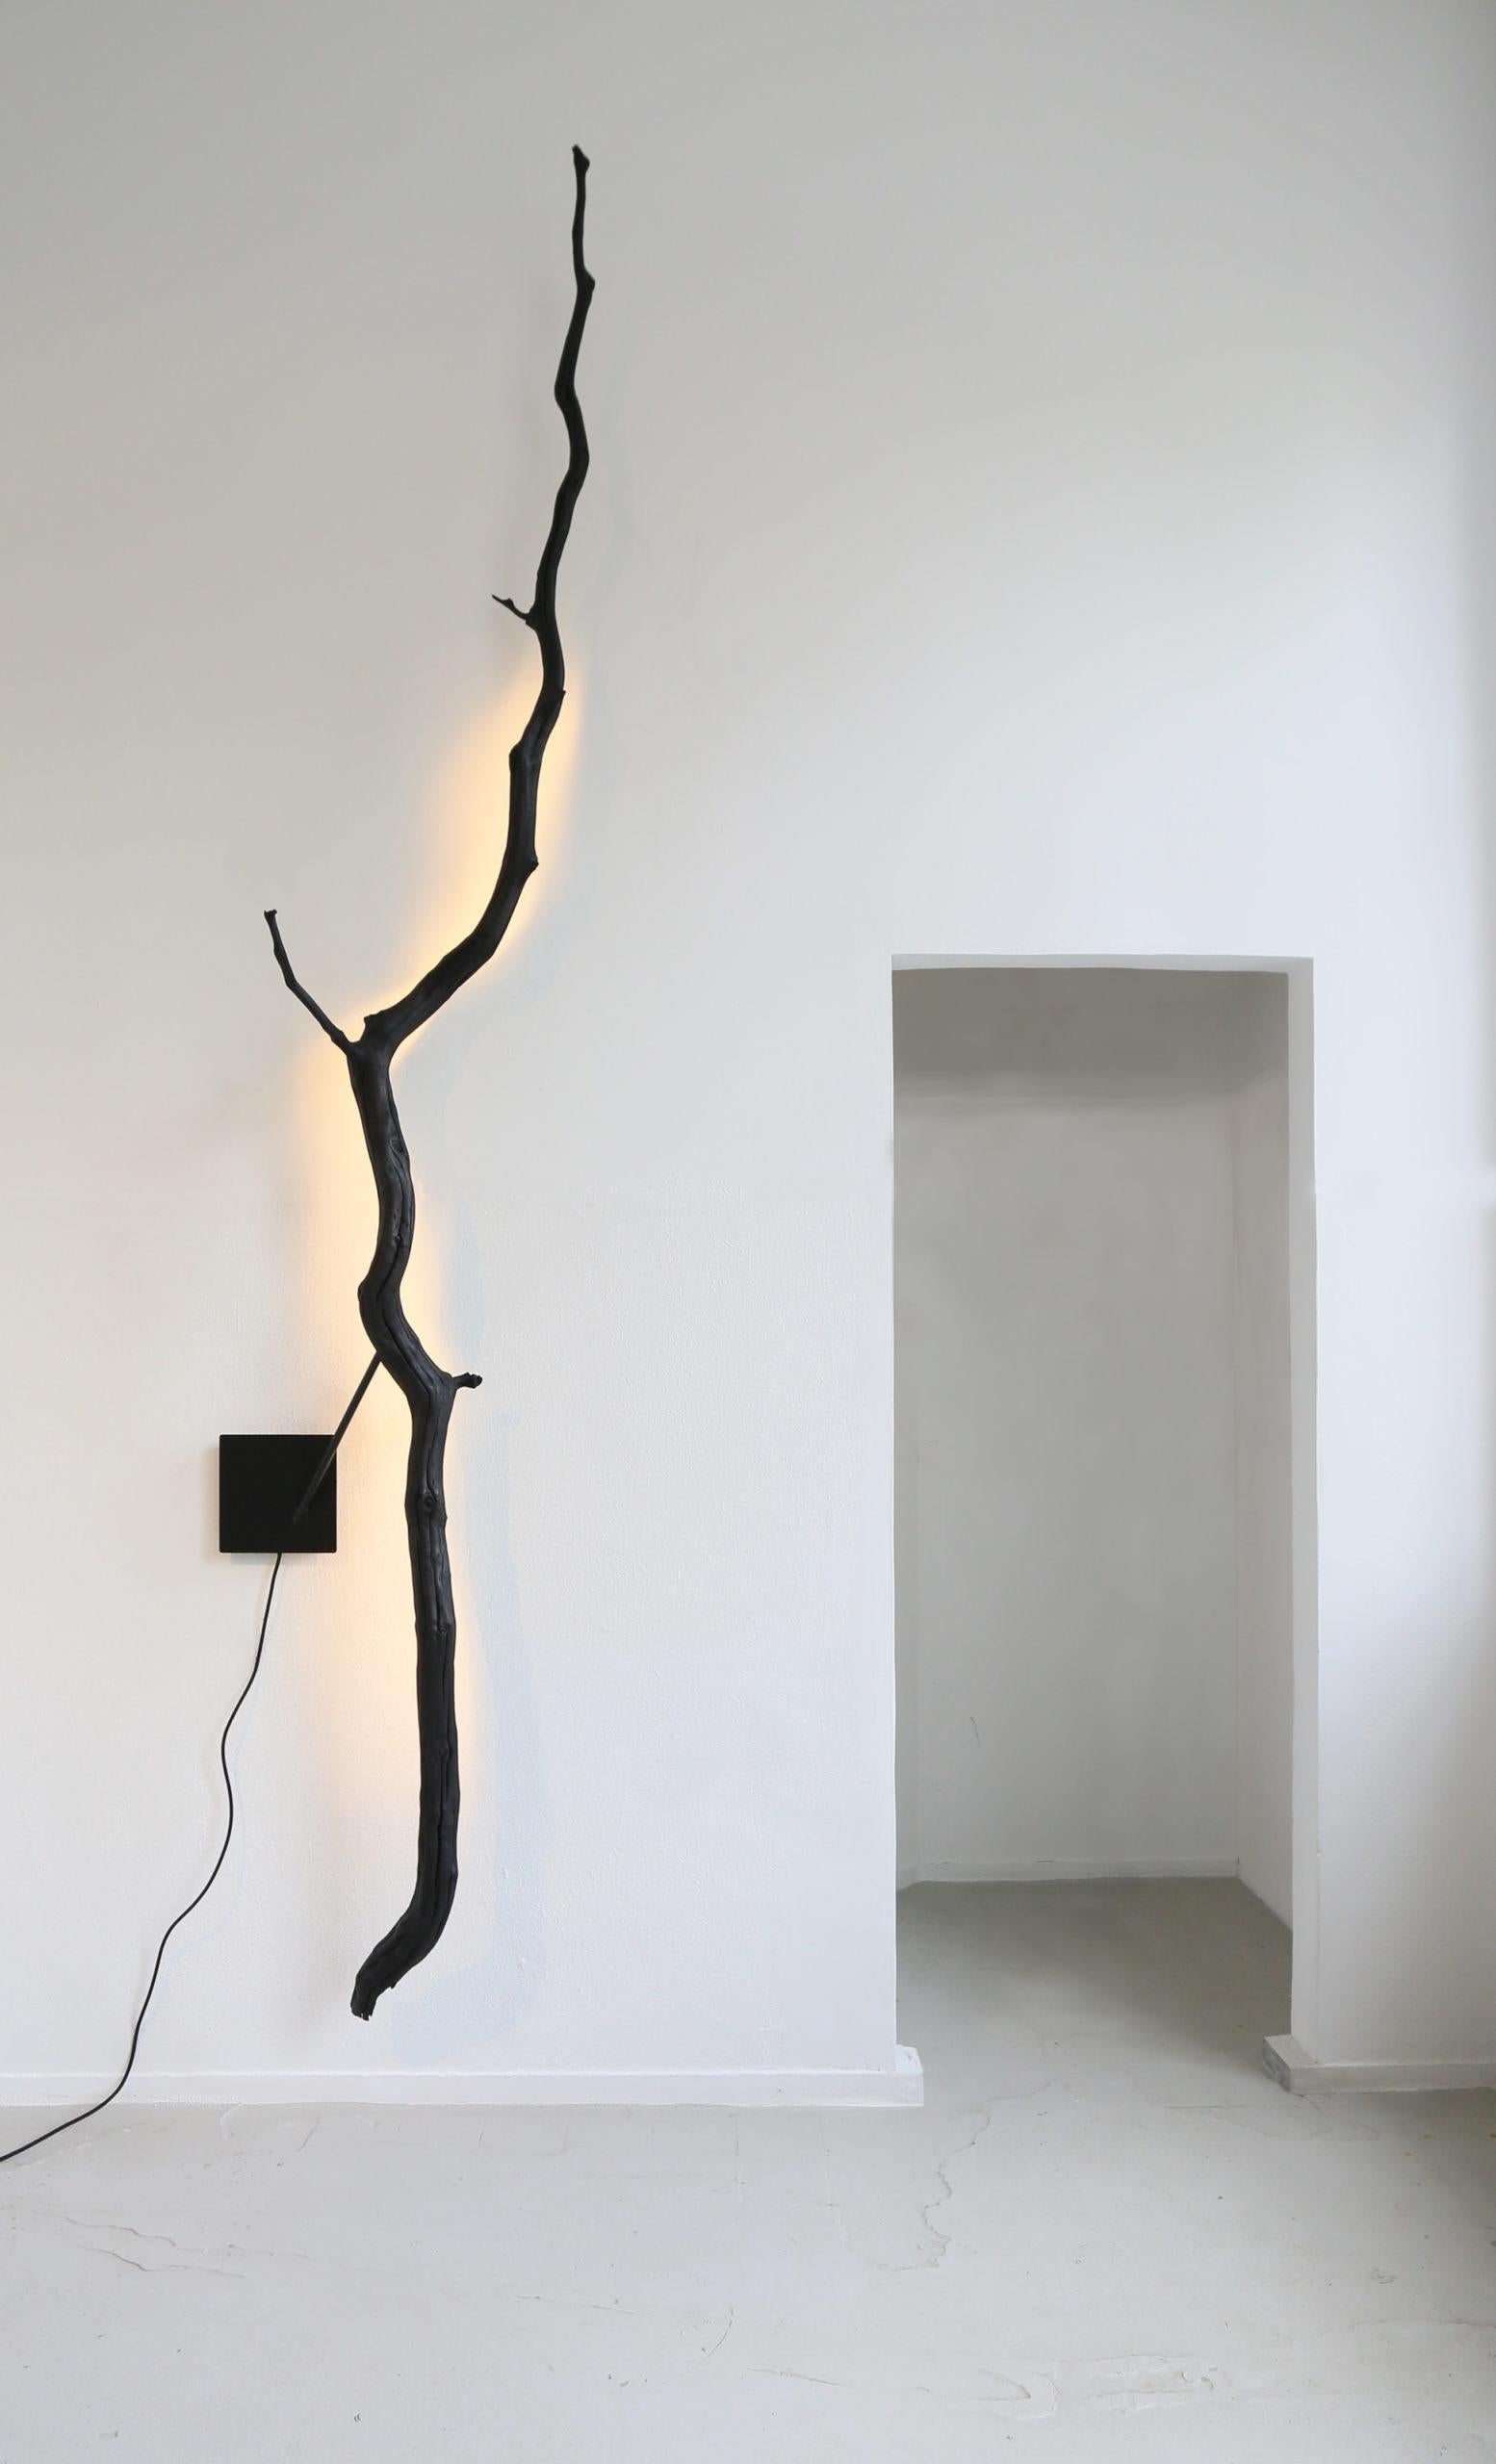 Contemporary black wooden wall light - Burning Ego Wall Lamp by Wim Verzantvoort for WDSTCK

Design: Wim Verzantvoort
Materials: Burned Oak wood
Features: Dimmable LED driver

Prices: 
< 220 cm: € 5.160,-
< 300 cm: € 6.020,-
> 300 cm: on